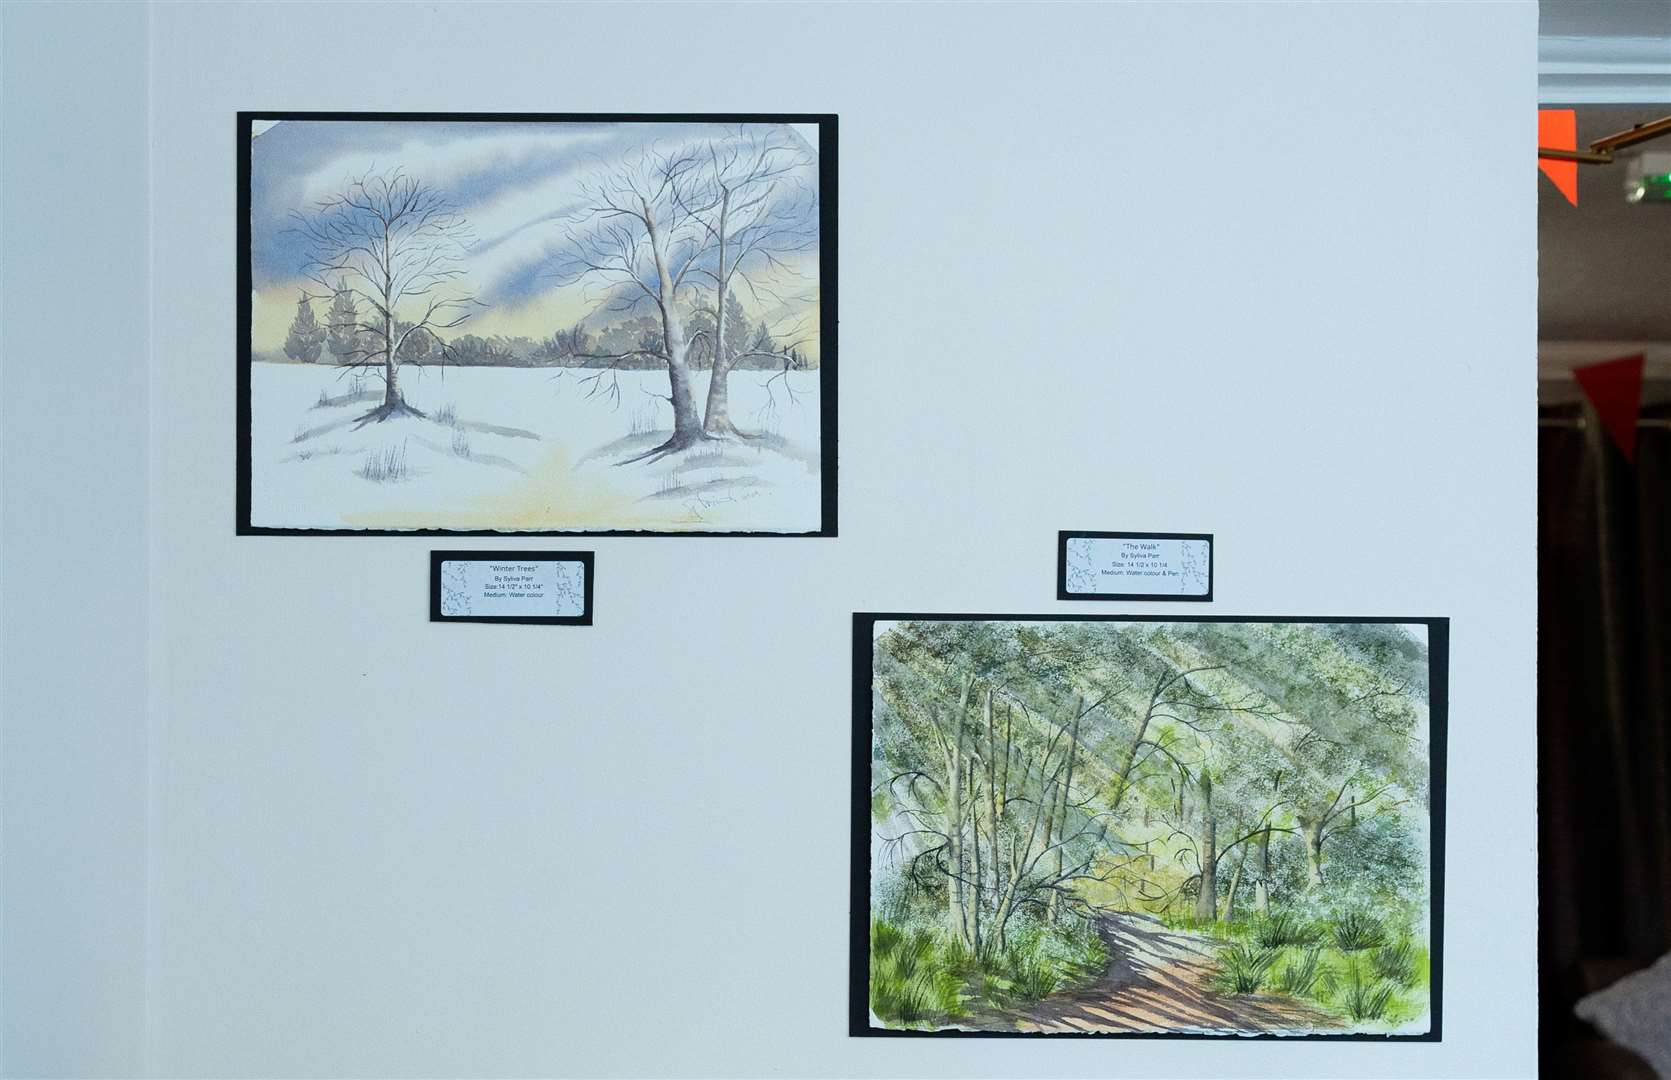 Some of the work by resident Sylvia Parr